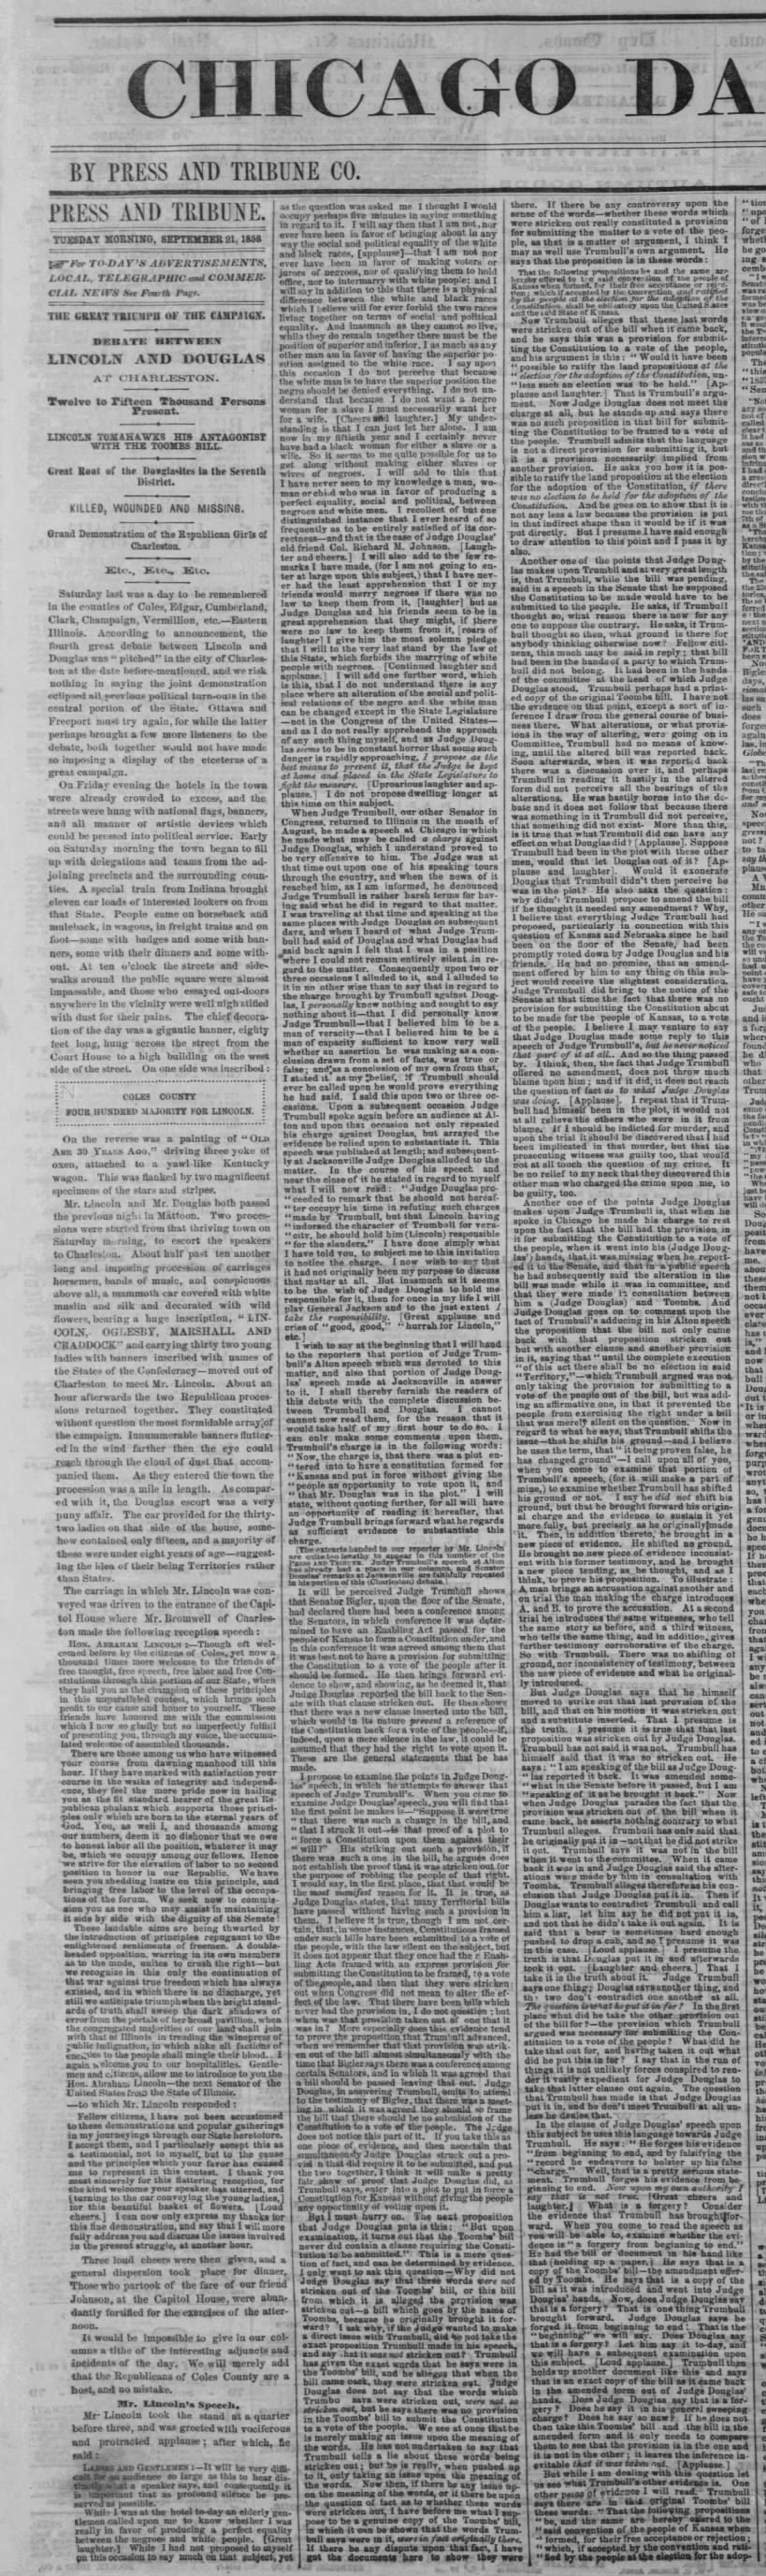 Tribune coverage of the Lincoln-Douglas debates from 1858